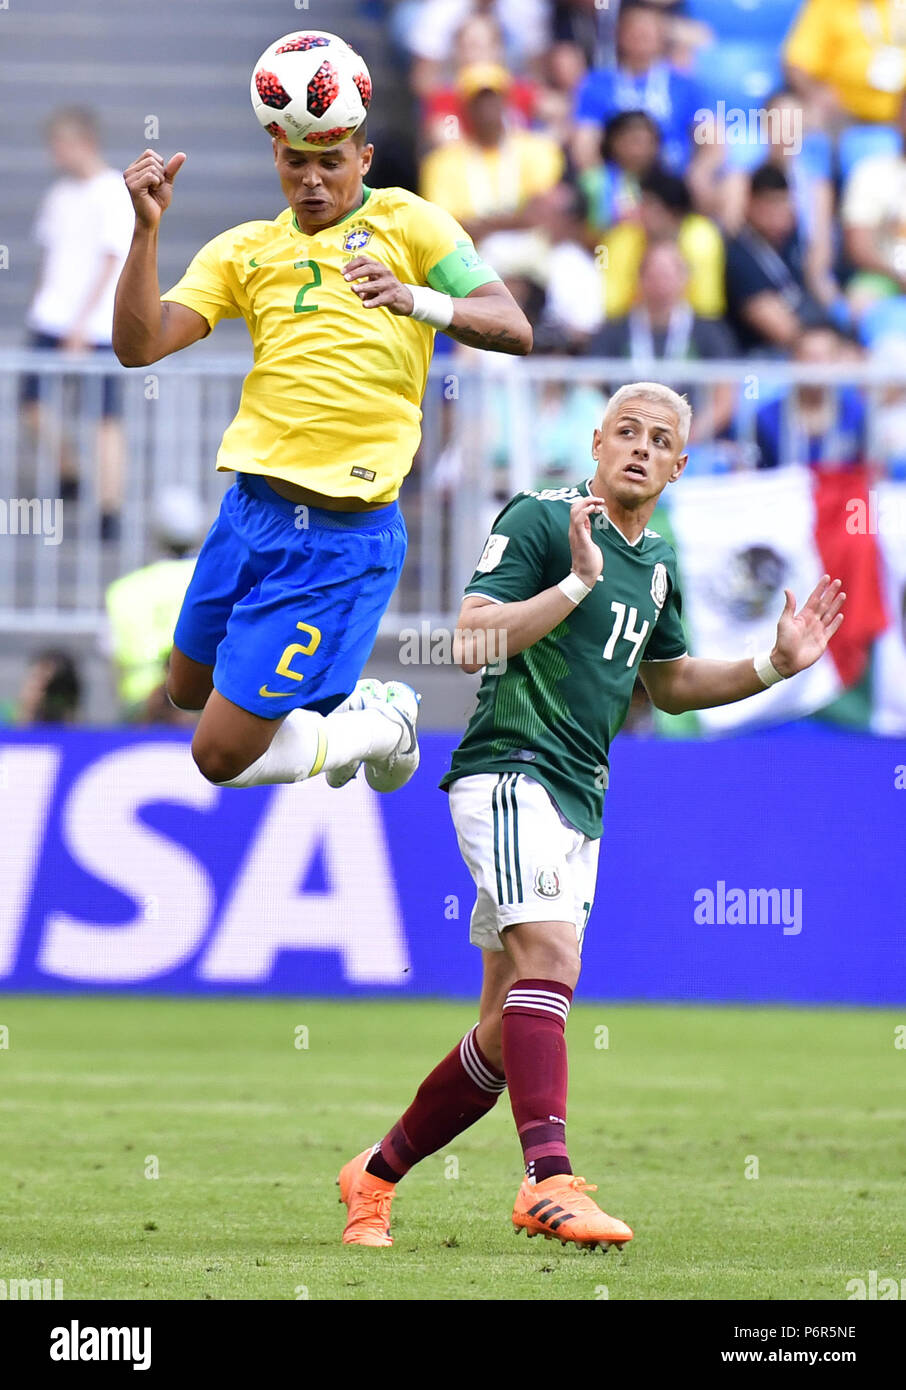 Samara, Russia. 2nd July, 2018. Thiago Silva (L) of Brazil vies with Javier Hernandez of Mexico during the 2018 FIFA World Cup round of 16 match between Brazil and Mexico in Samara, Russia, July 2, 2018. Brazil won 2-0 and advanced to the quarter-final. Credit: Chen Yichen/Xinhua/Alamy Live News Stock Photo